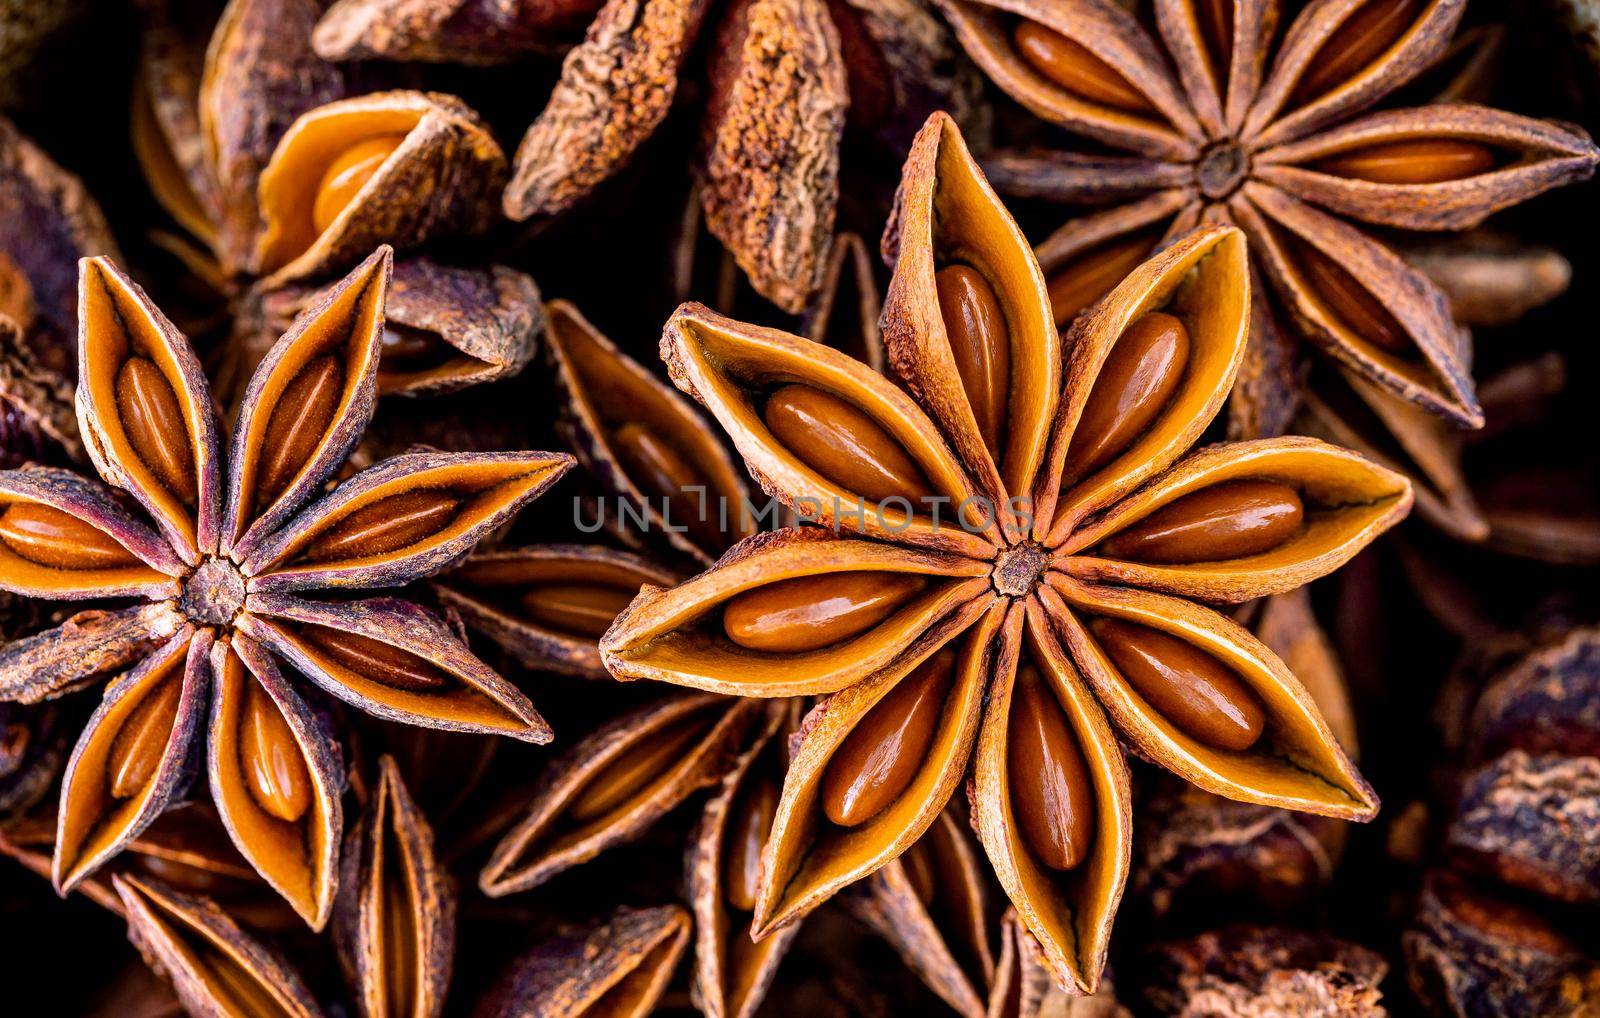 Chinese star anise close up background. Dried star anise spice fruits top view.
 by kerdkanno